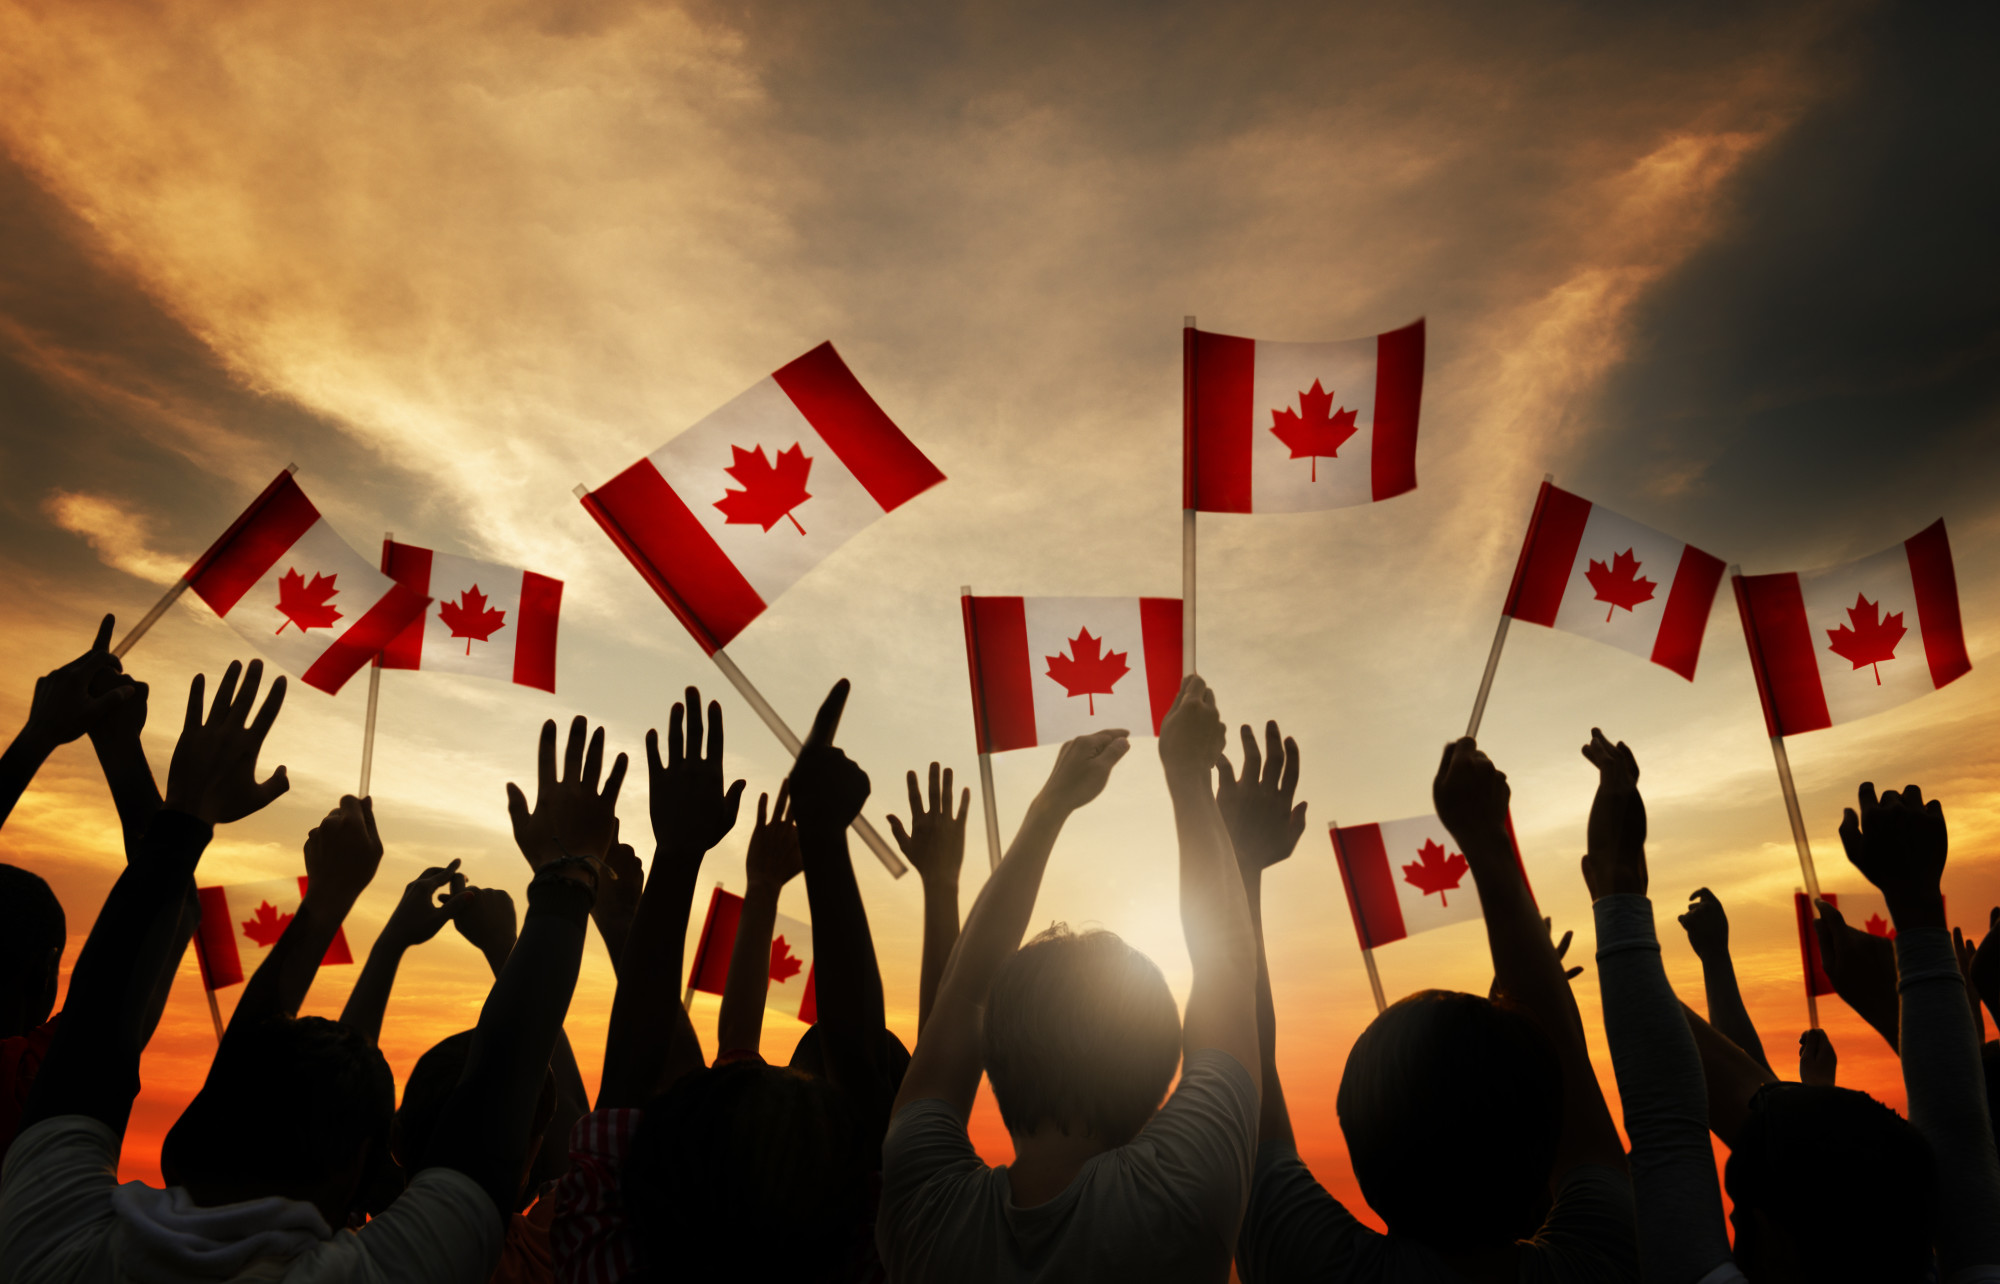 5 Important Things to Consider Before Moving to Canada